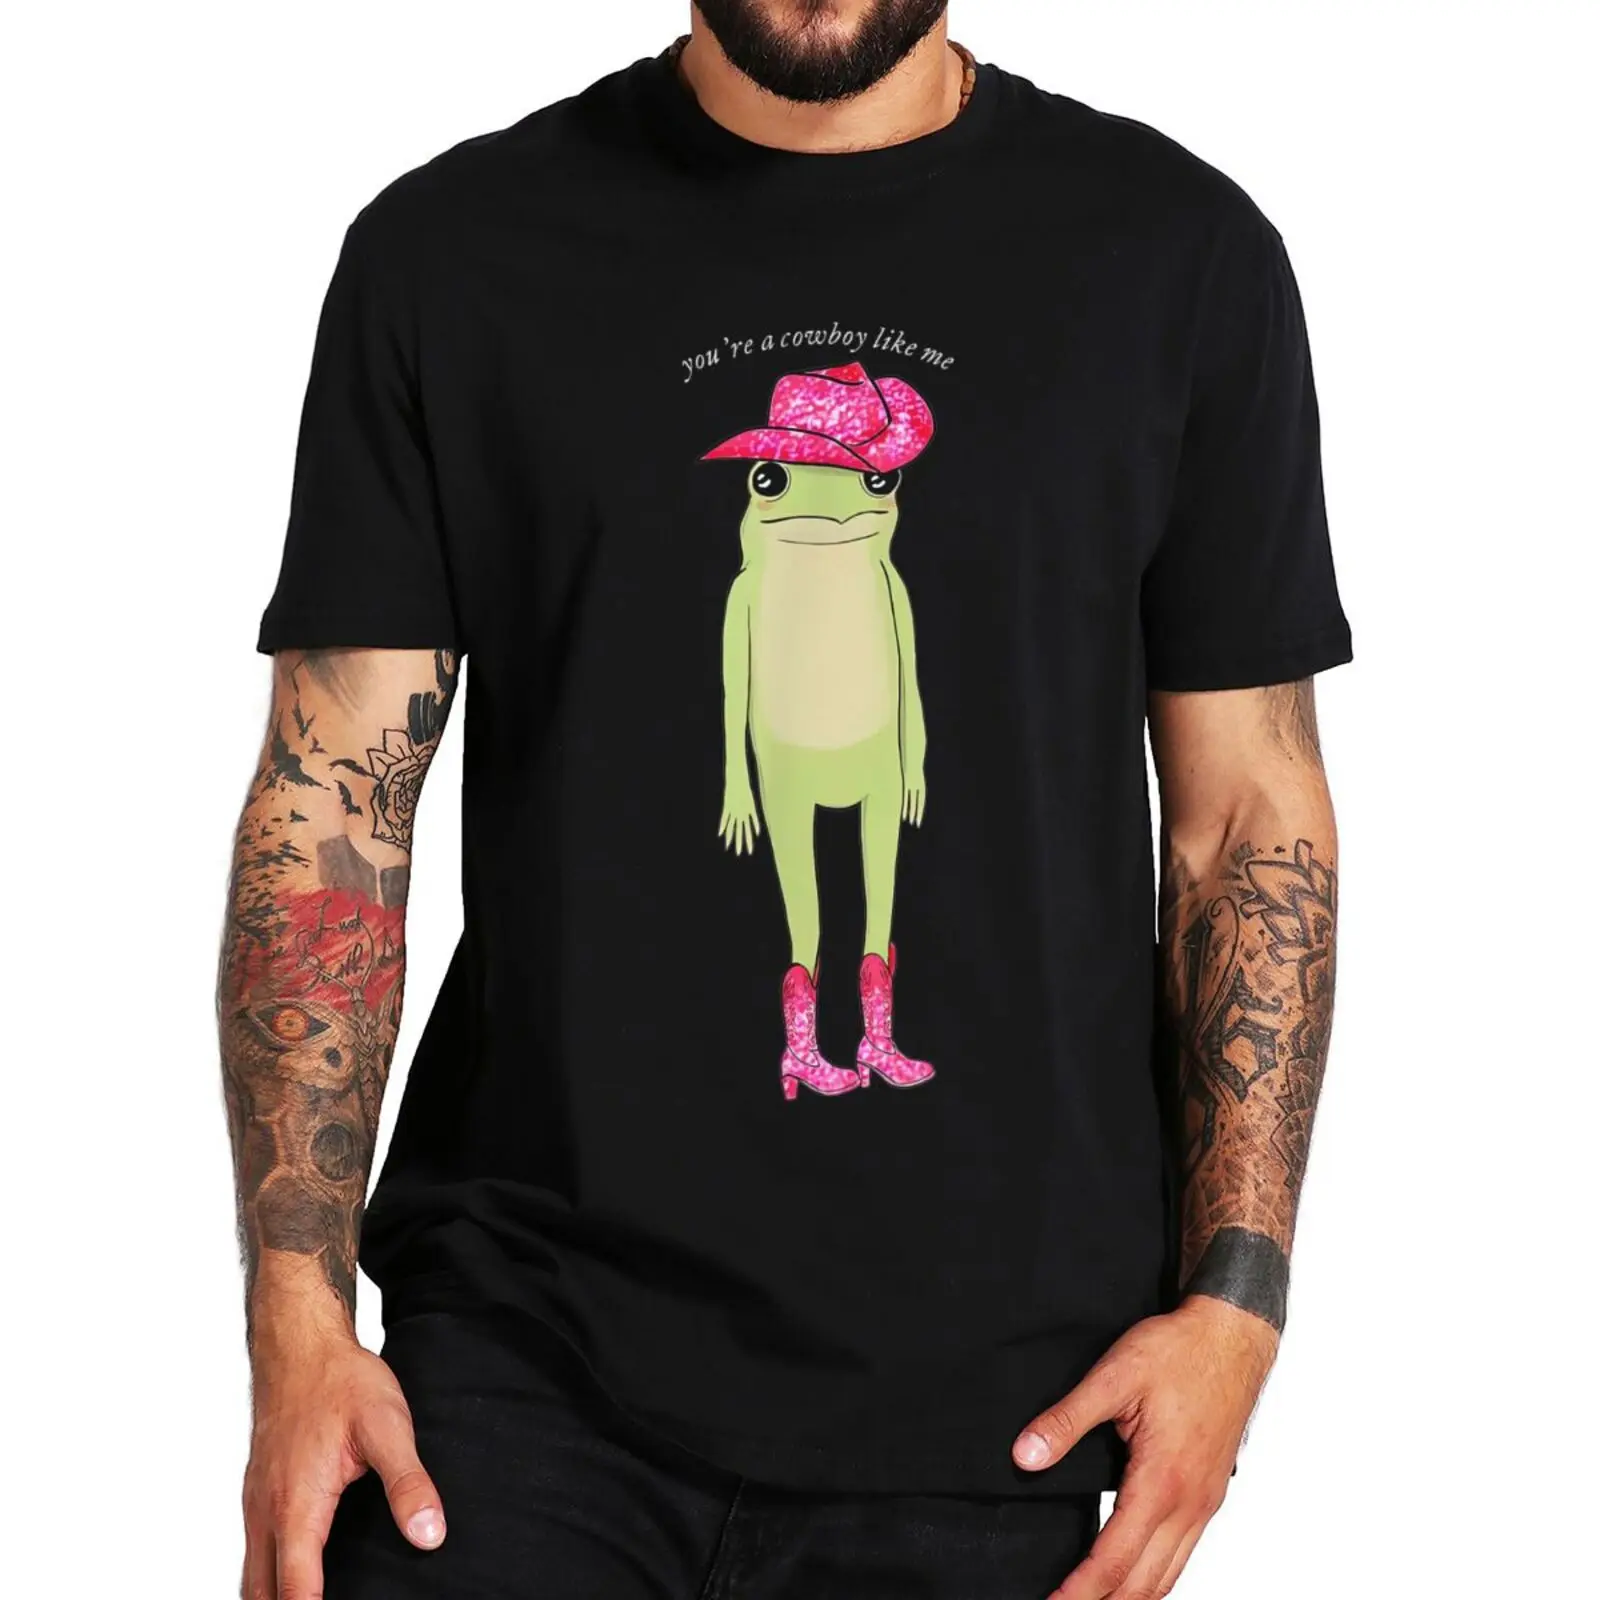 

You're A Cowboy Like Me T Shirt Funny Frog Pink Cowboy Hat Cowgirl T-Shirt Casual Tee Tops Short Sleeve 100% Cotton T-Shirt